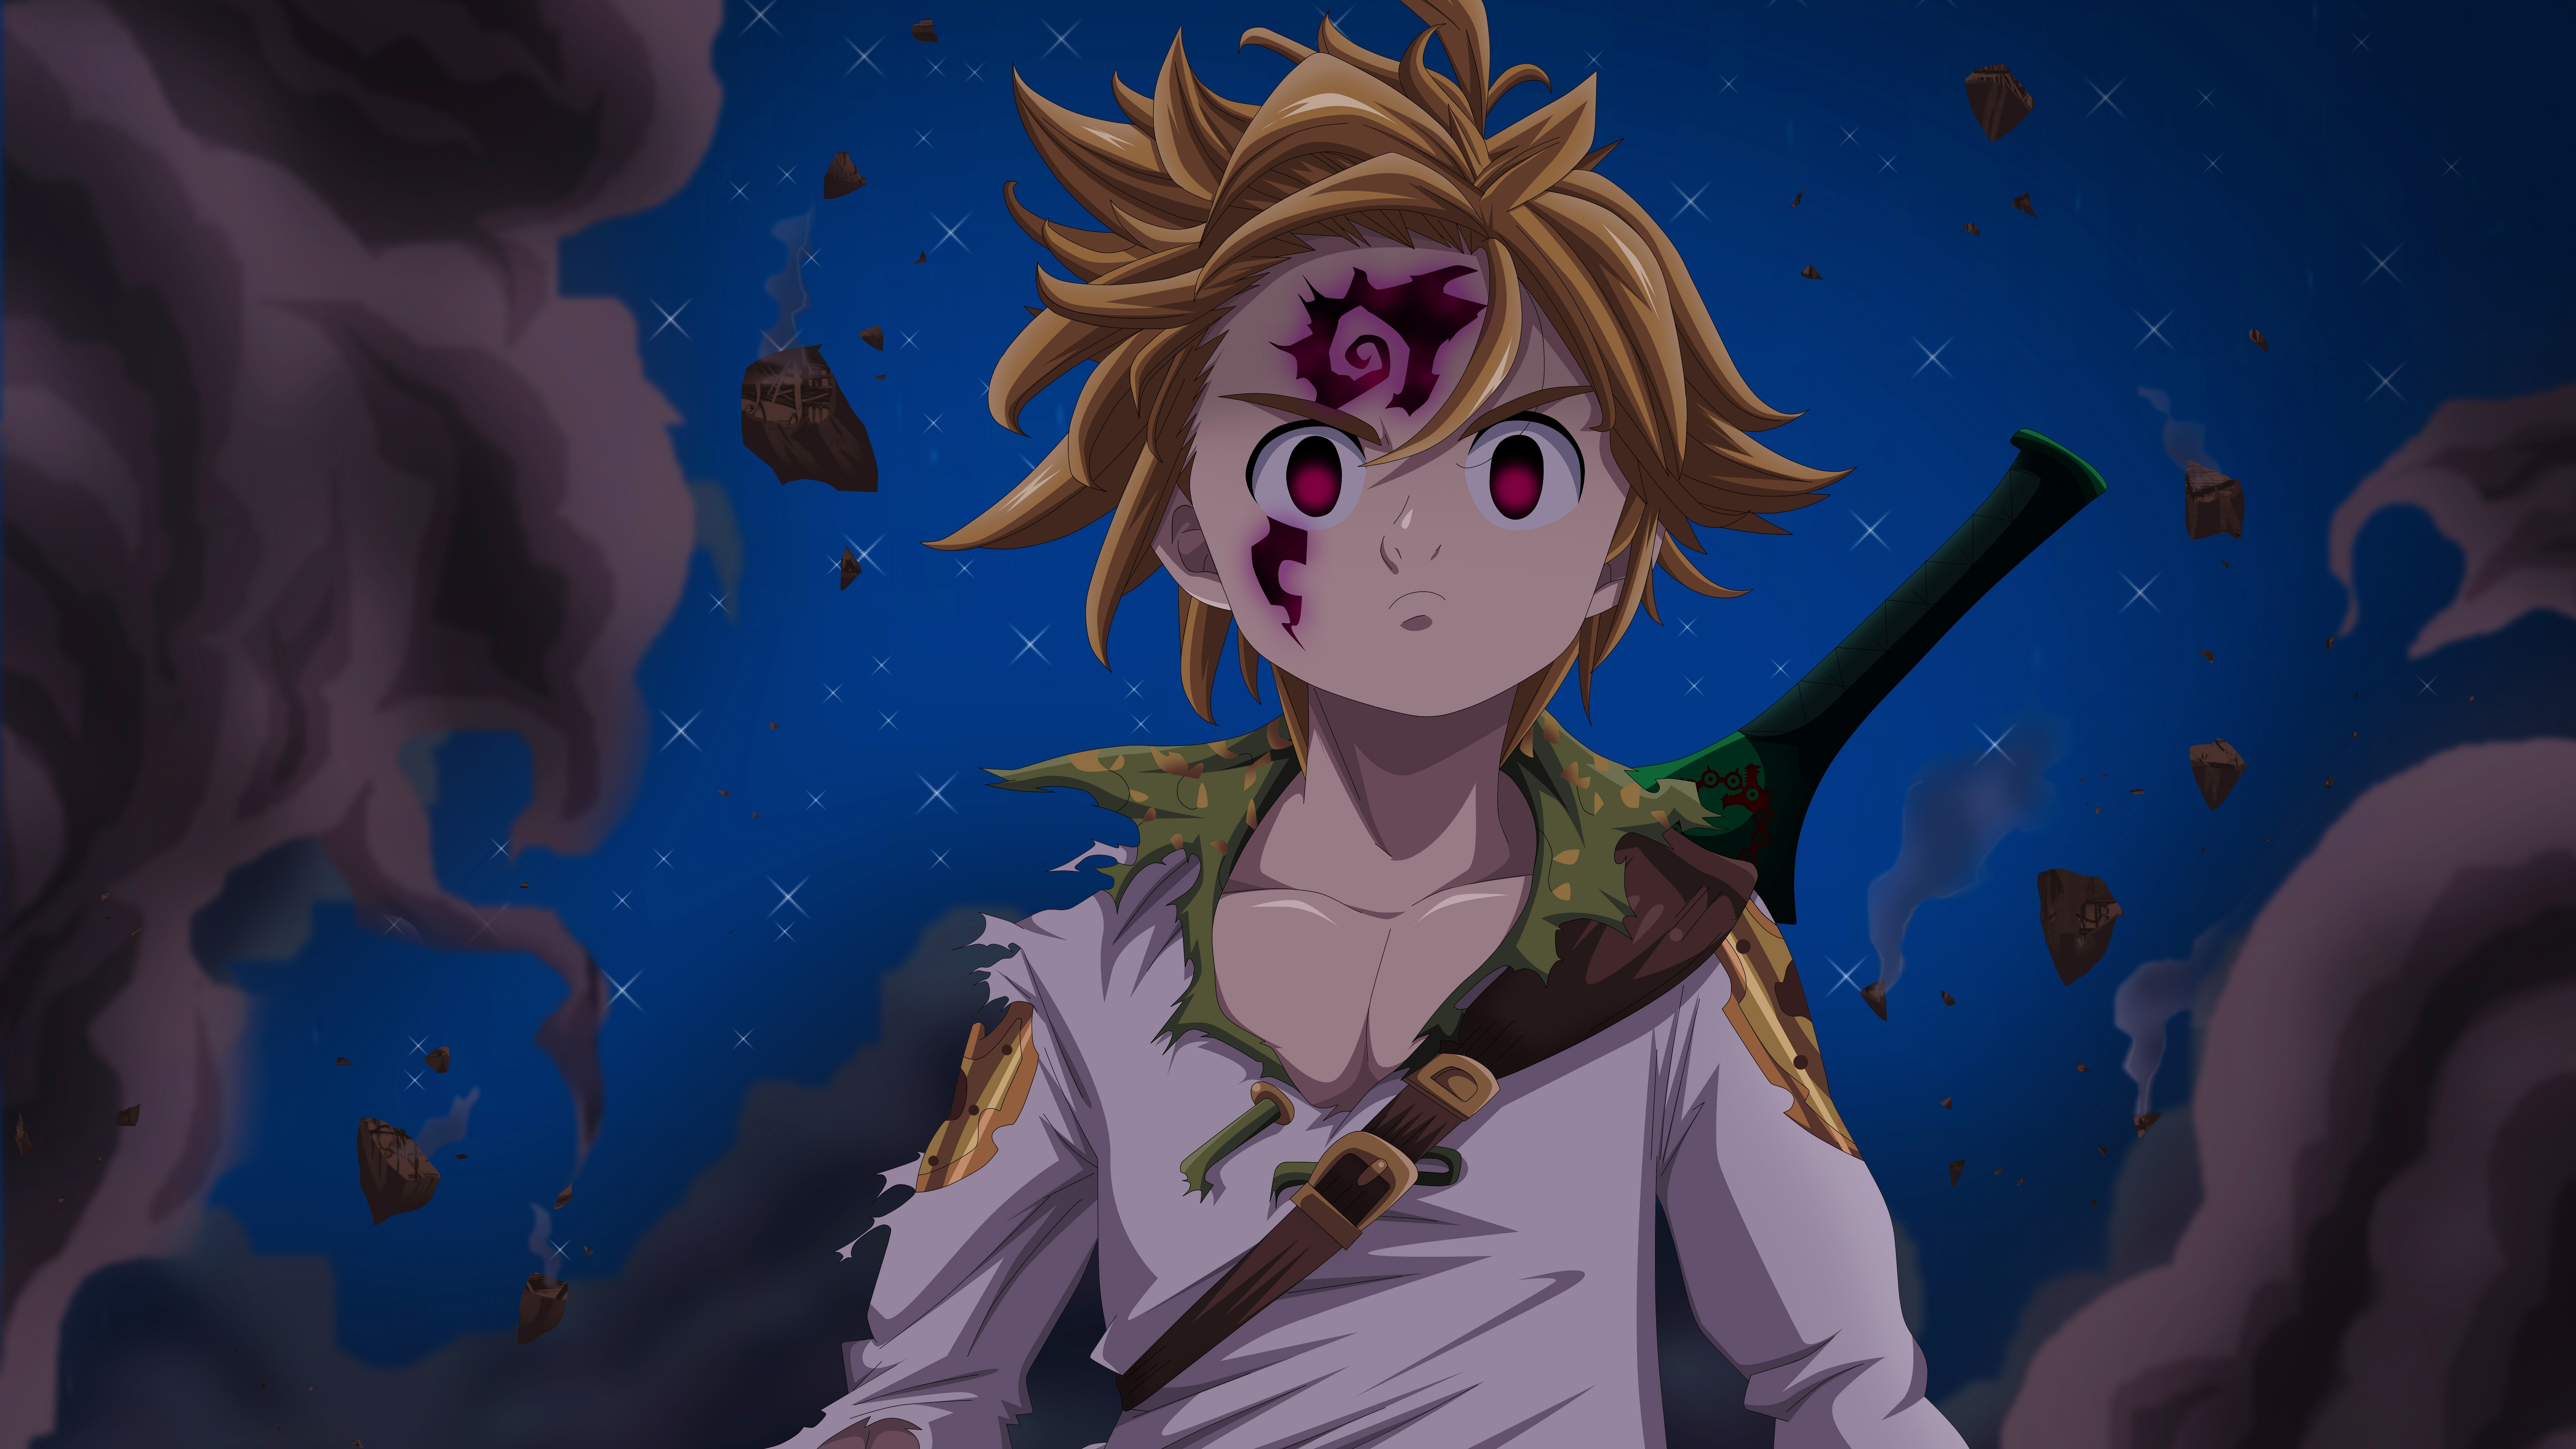 The Seven Deadly Sins Wallpapers - Wallpaper Cave